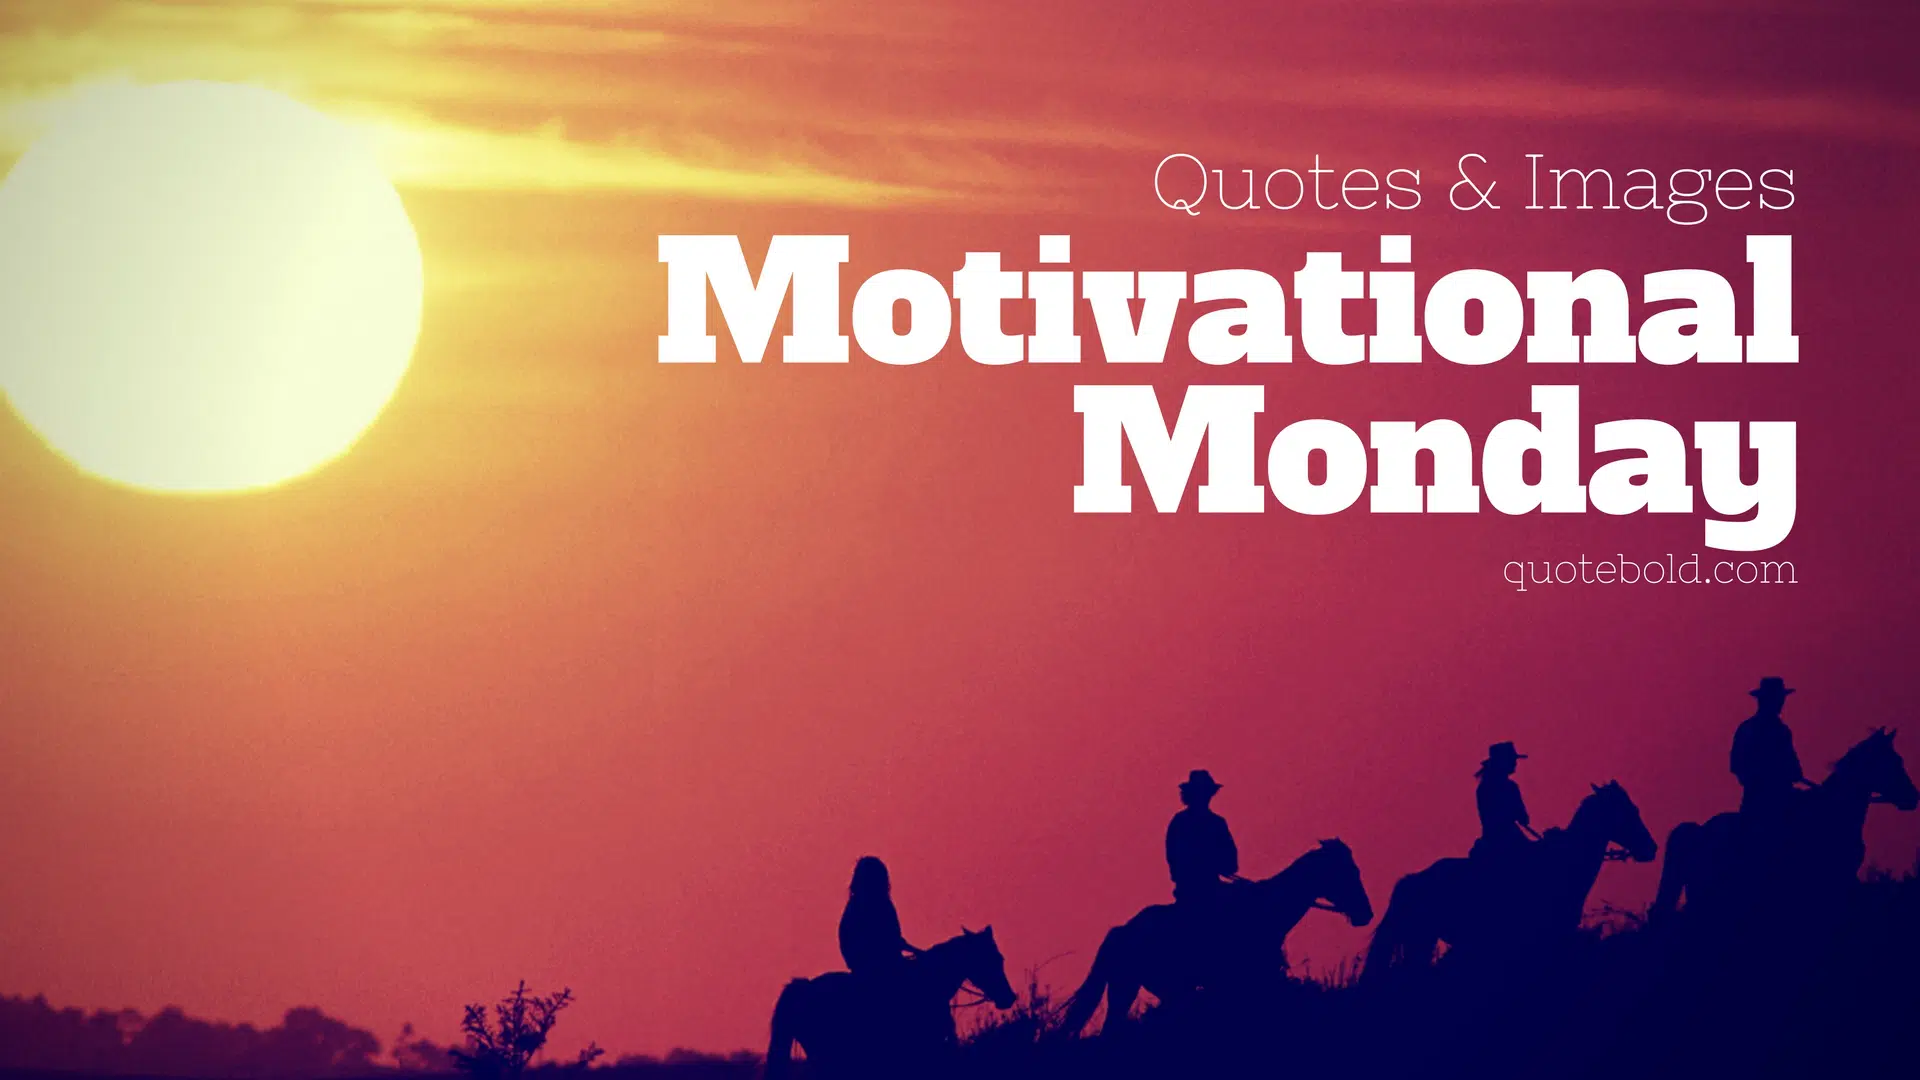 51 Monday Motivational Quotes For Work W Images Quote Bold